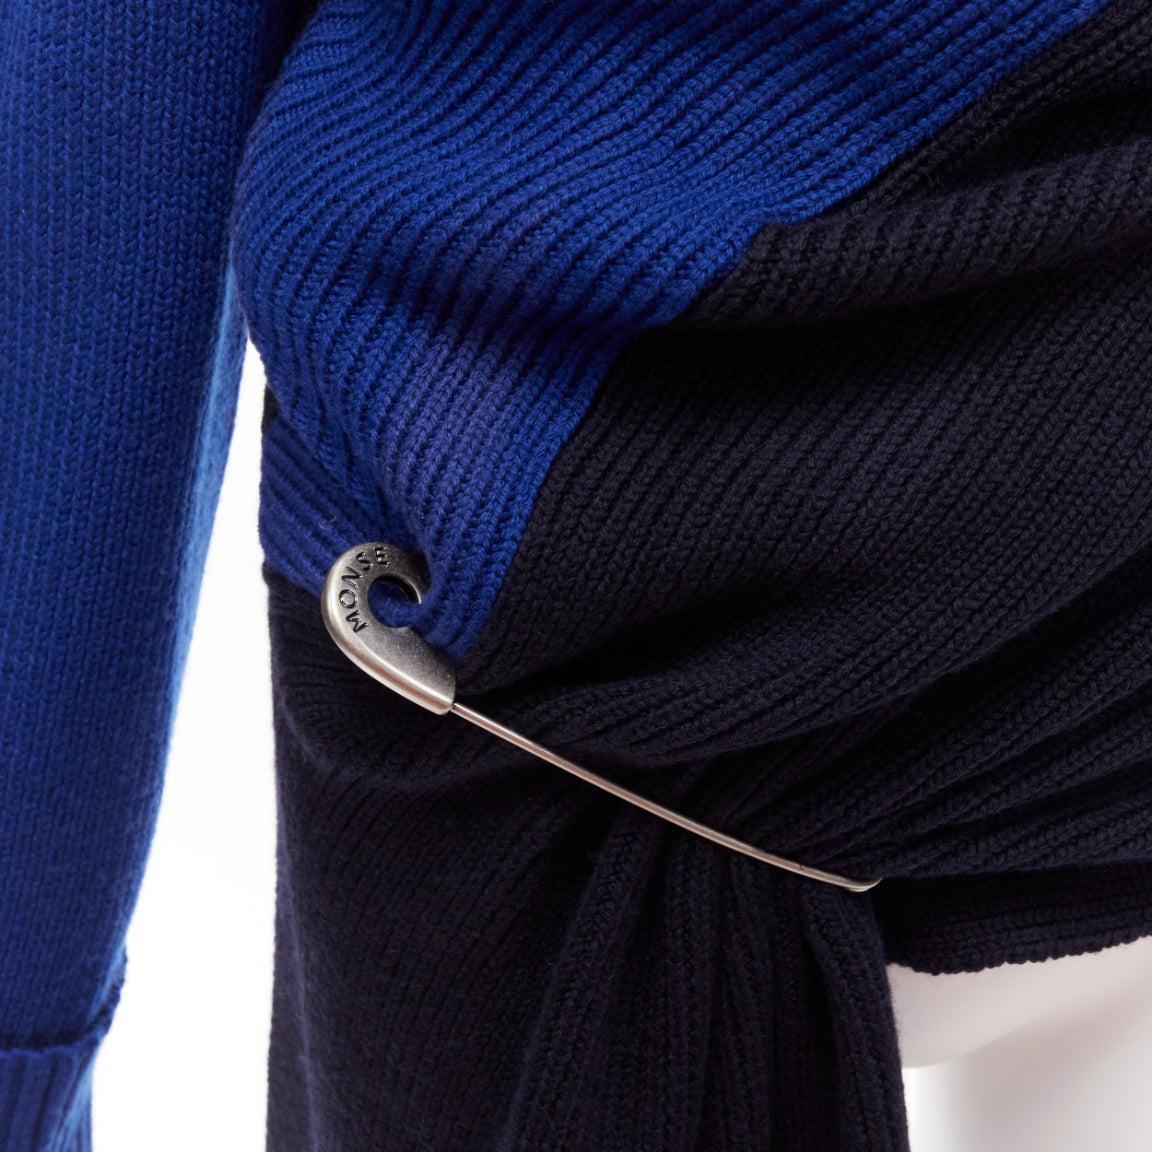 MONSE Runway merino wool blue navy colorblock XL pin cape sleeve sweater XS
Reference: AAWC/A00647
Brand: Monse
Collection: 2019 - Runway
Material: Merino Wool
Color: Blue
Pattern: Solid
Extra Details: Logo signed antique silver-tone decorative XL